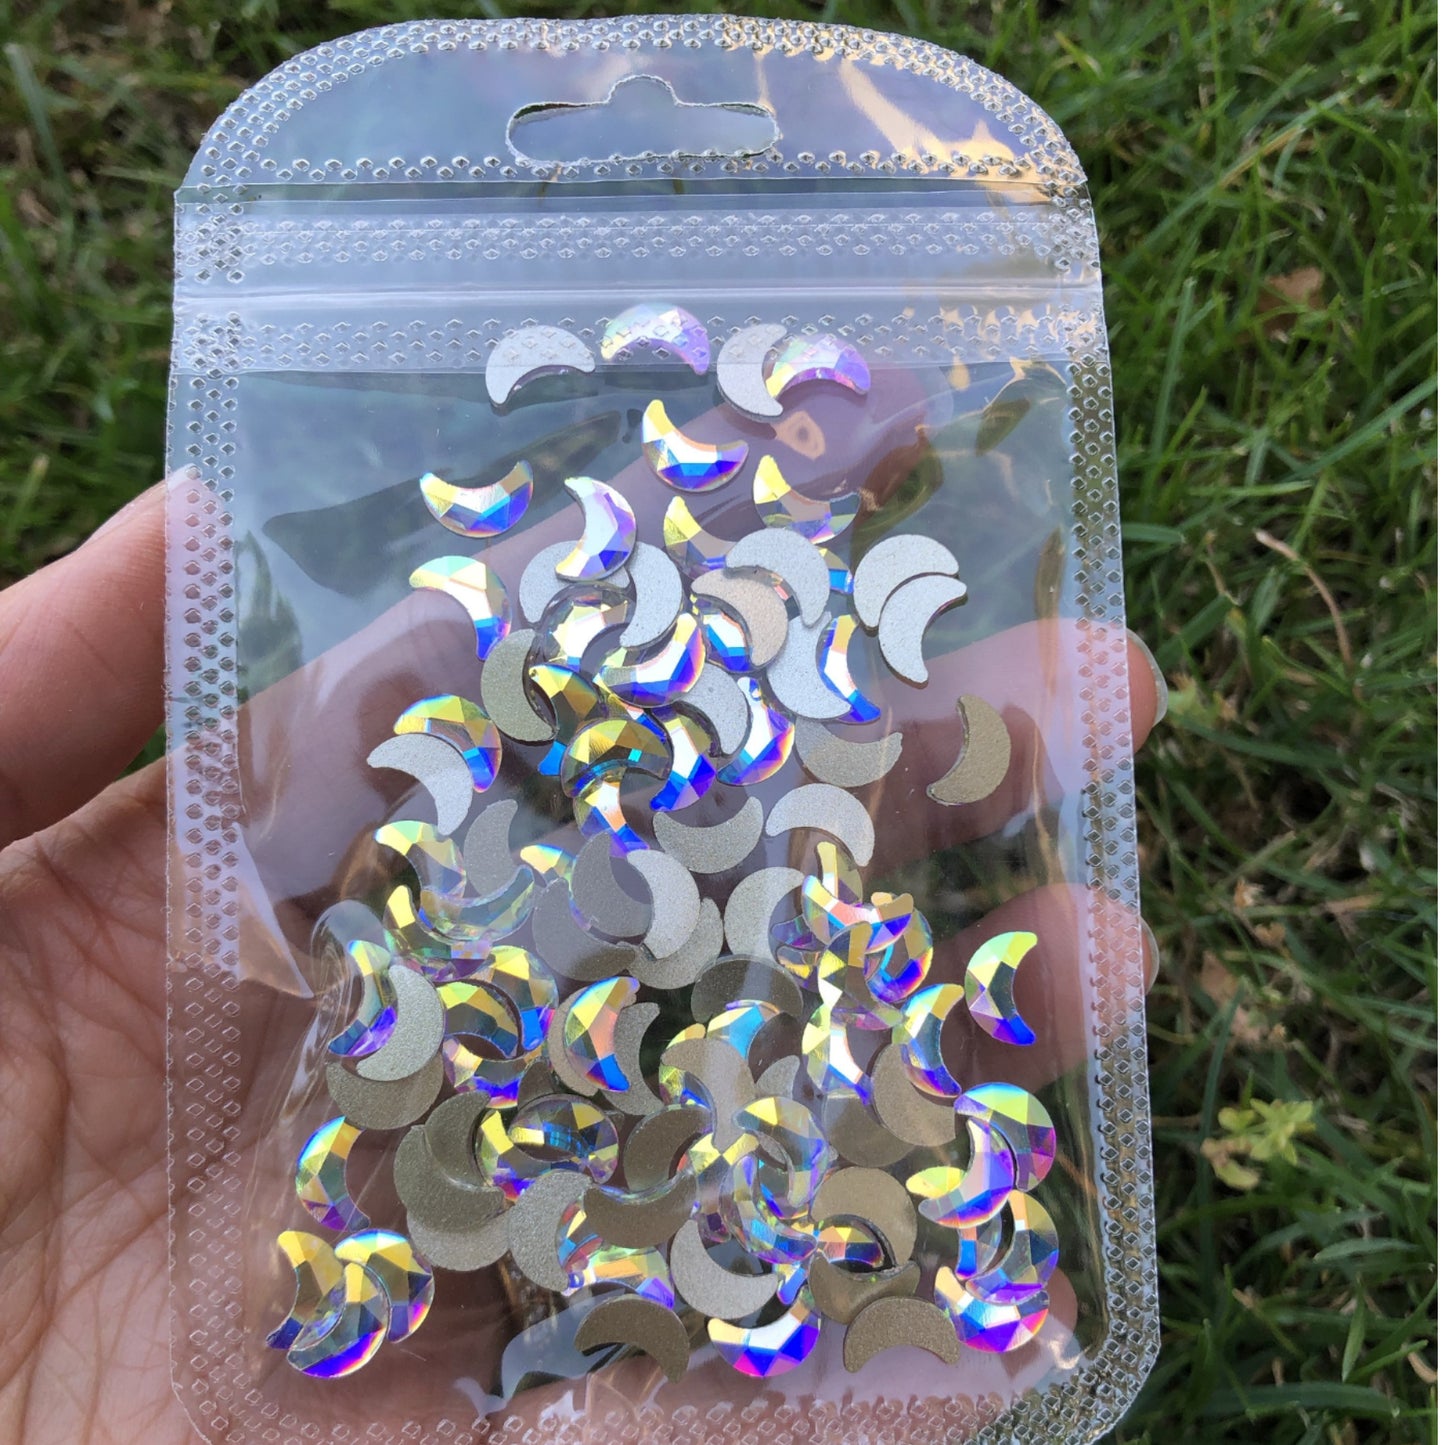 Flatback Rhinestone For Nail Art - Moon Shape - Crystal AB. Crystal AB coating. Silver foiling enhance the reflectivity and make more attractive